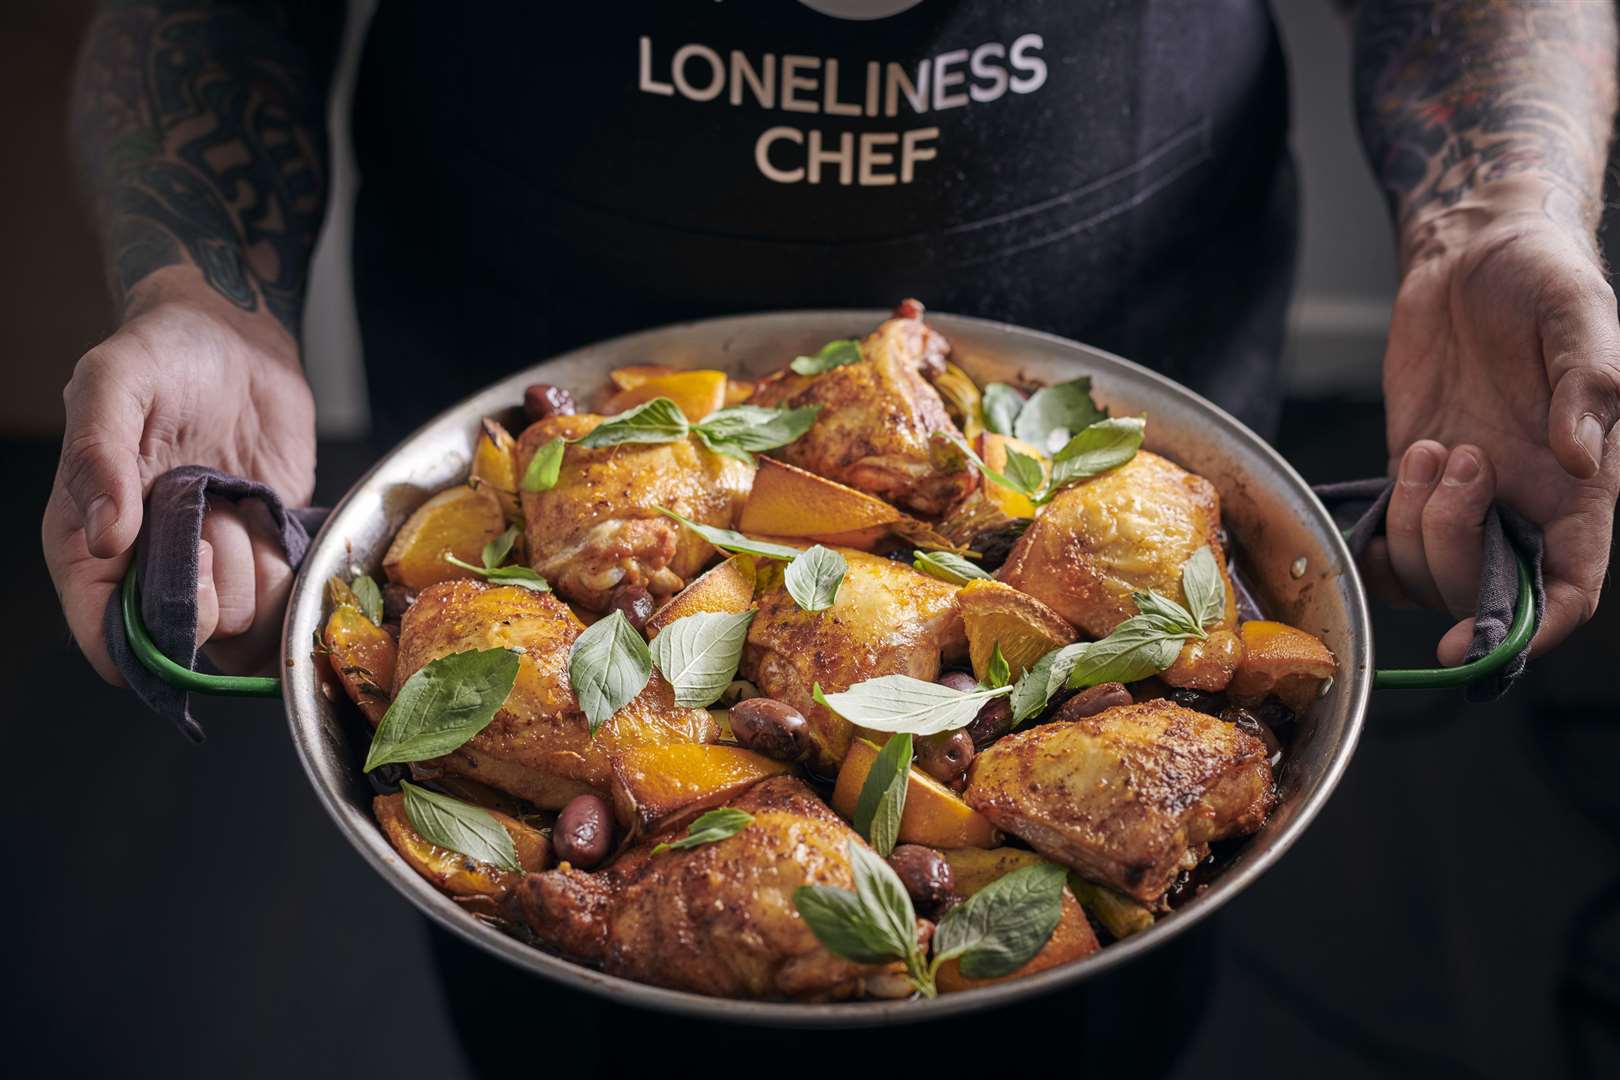 Andrew has created original recipes that encourage cooking and eating together, in a bid to combat loneliness. Phot Credit: SpareRoom/Campaign to End Loneliness (18287715)